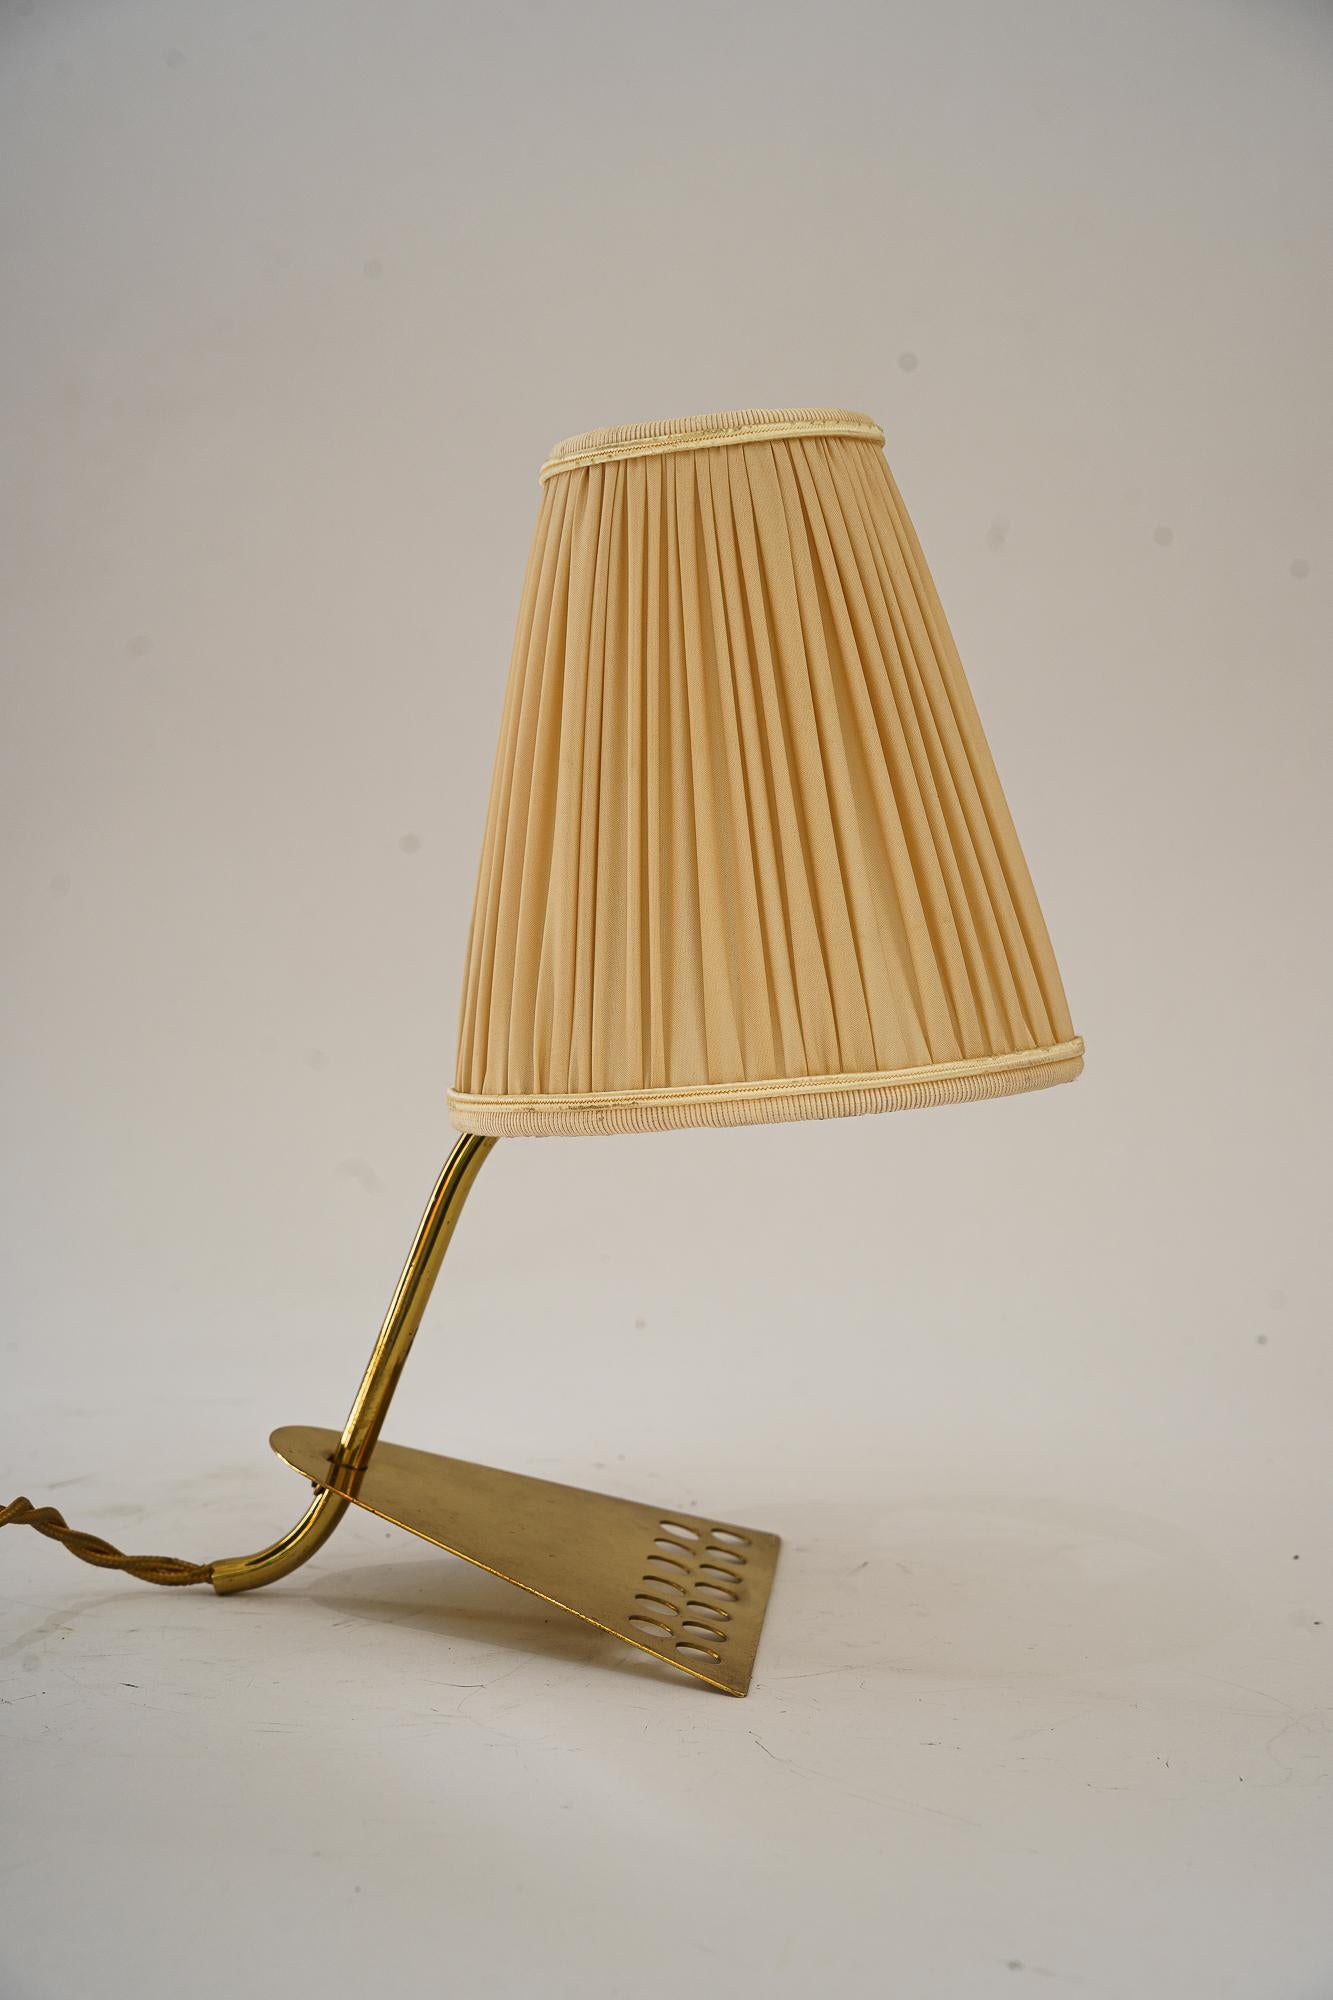 Rare rupert Nikoll table lamp with fabric shade vienna around 1950s
Original condition
The fabric shade is replaced ( New )